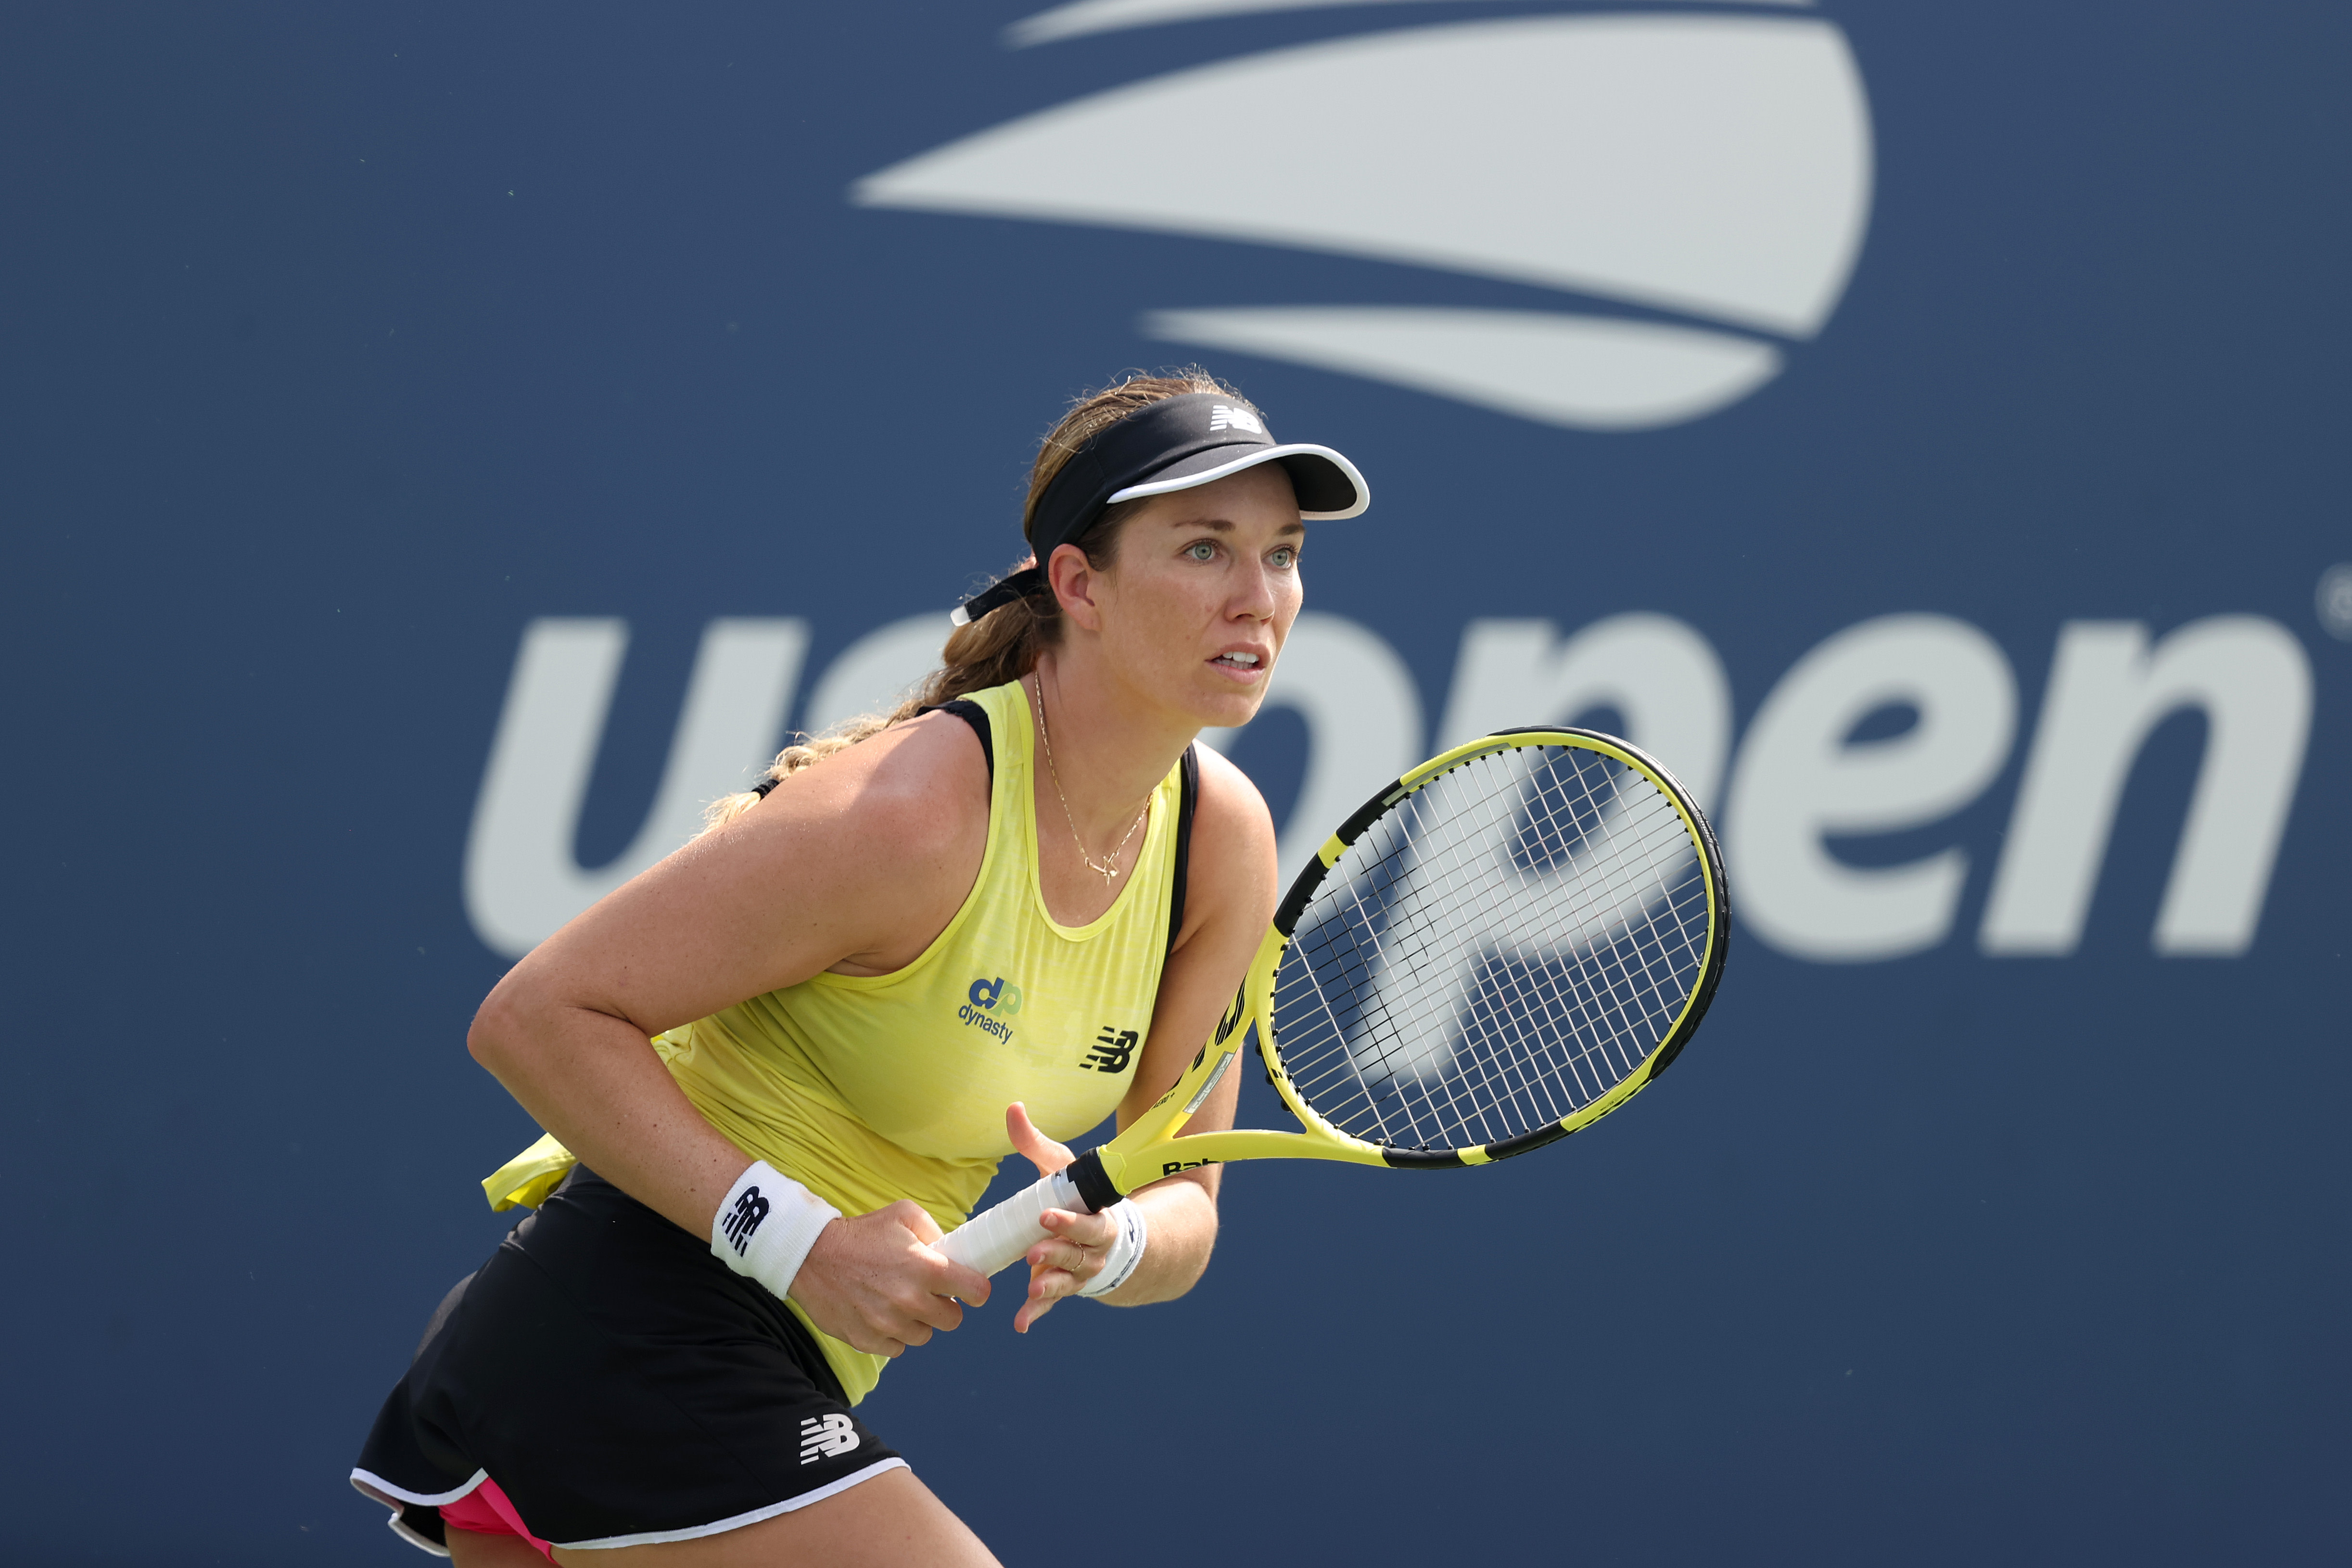 Danielle Collins hits new plateau at US Open, aims to channel crowd support into Sabalenka upset